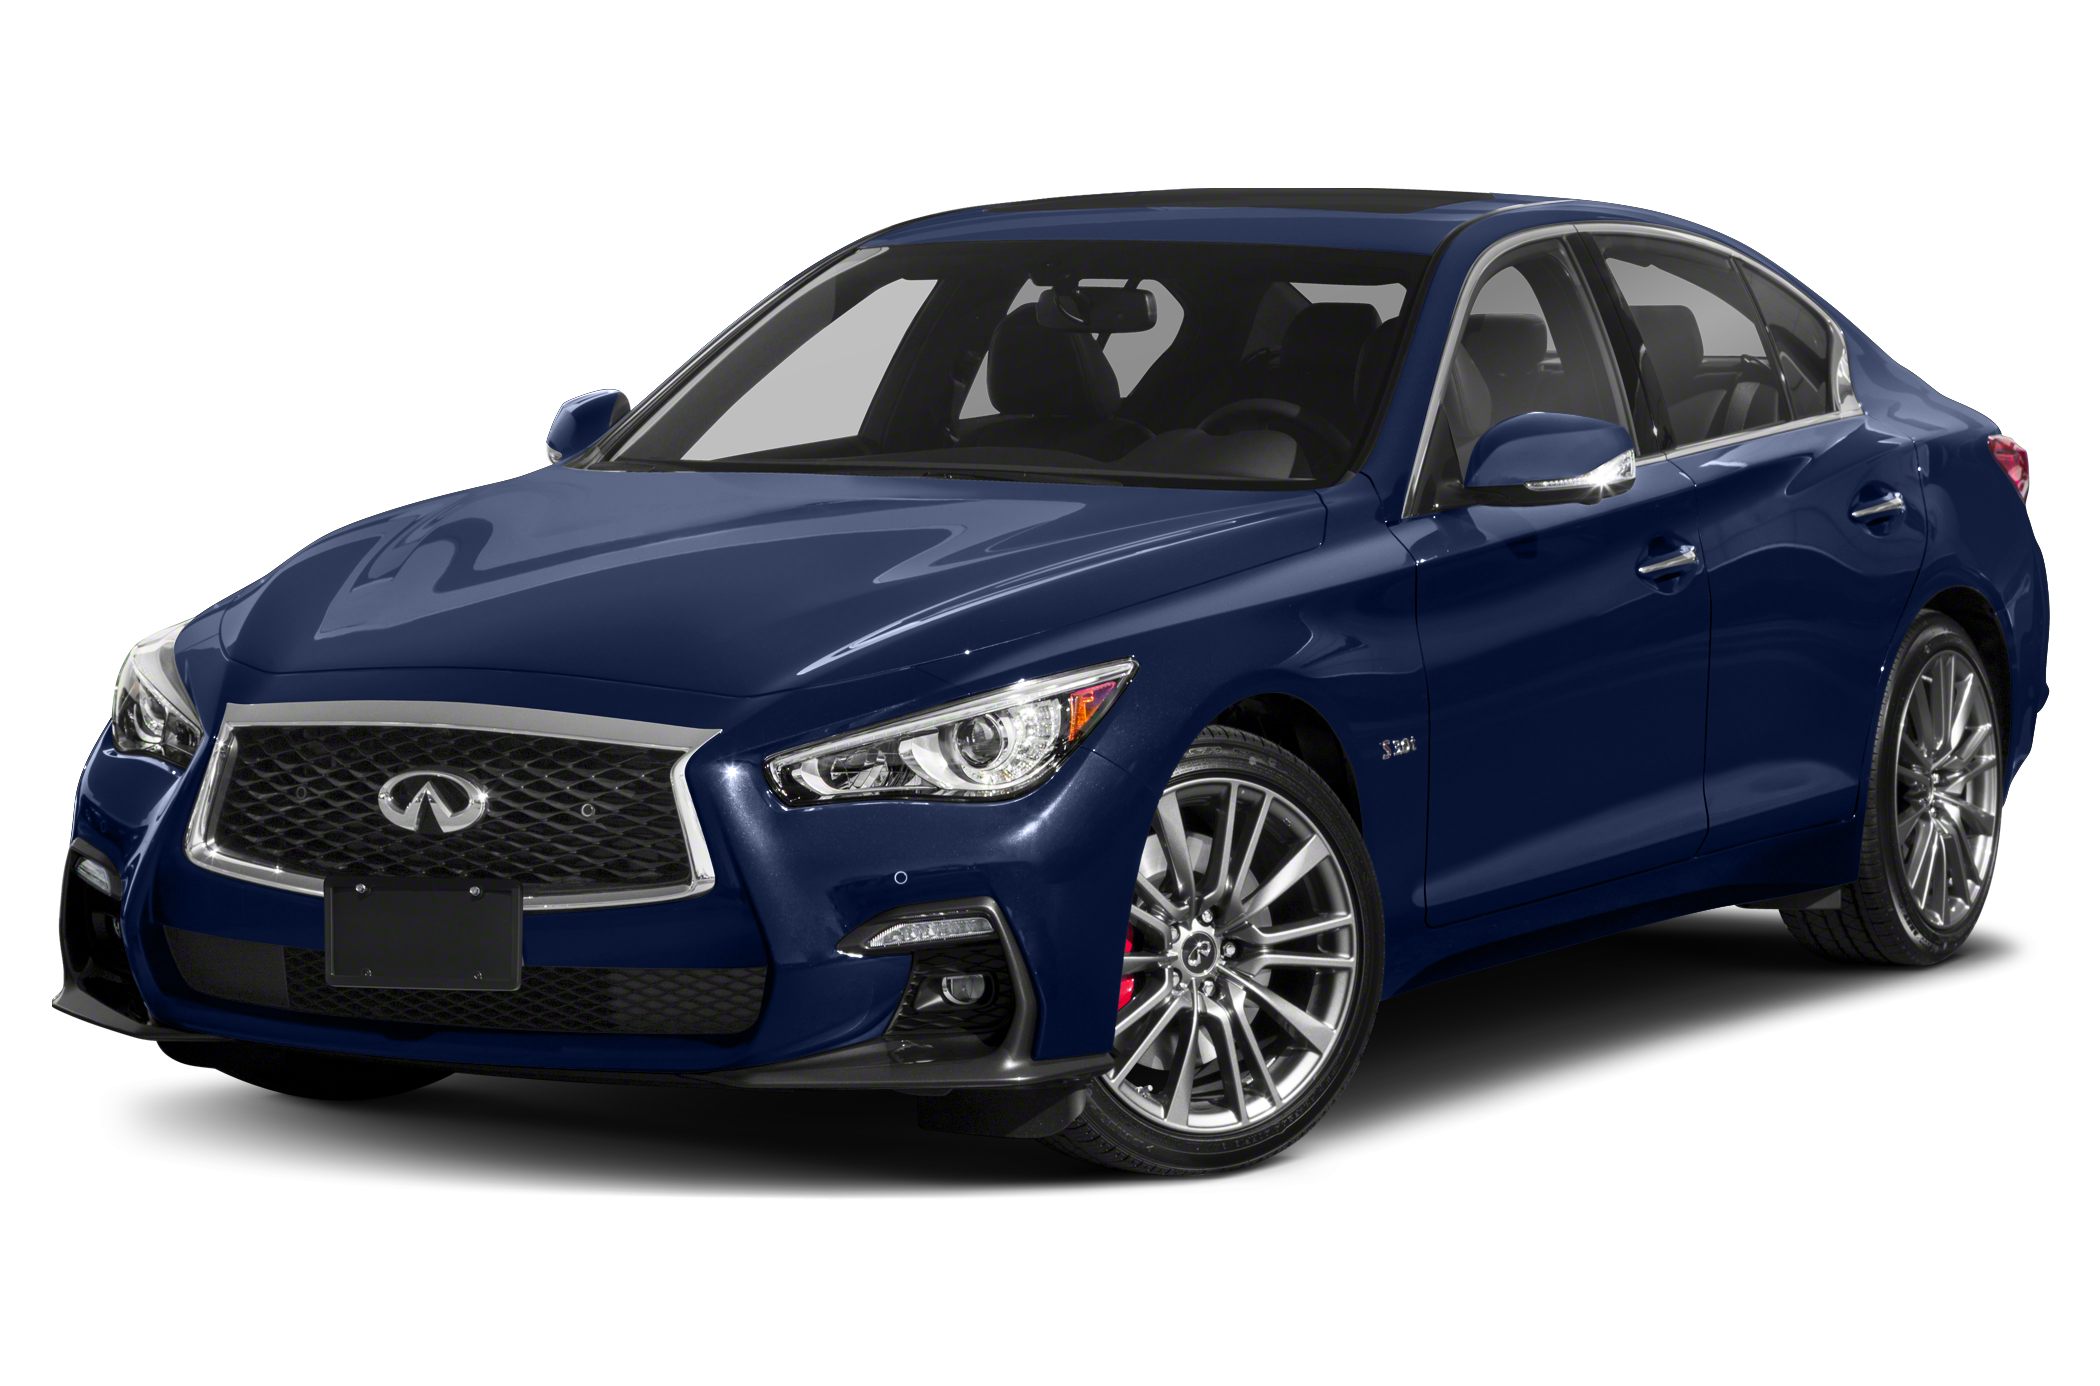 2020 Infiniti Q50 3 0t Red Sport 400 4dr All Wheel Drive Sedan Pictures